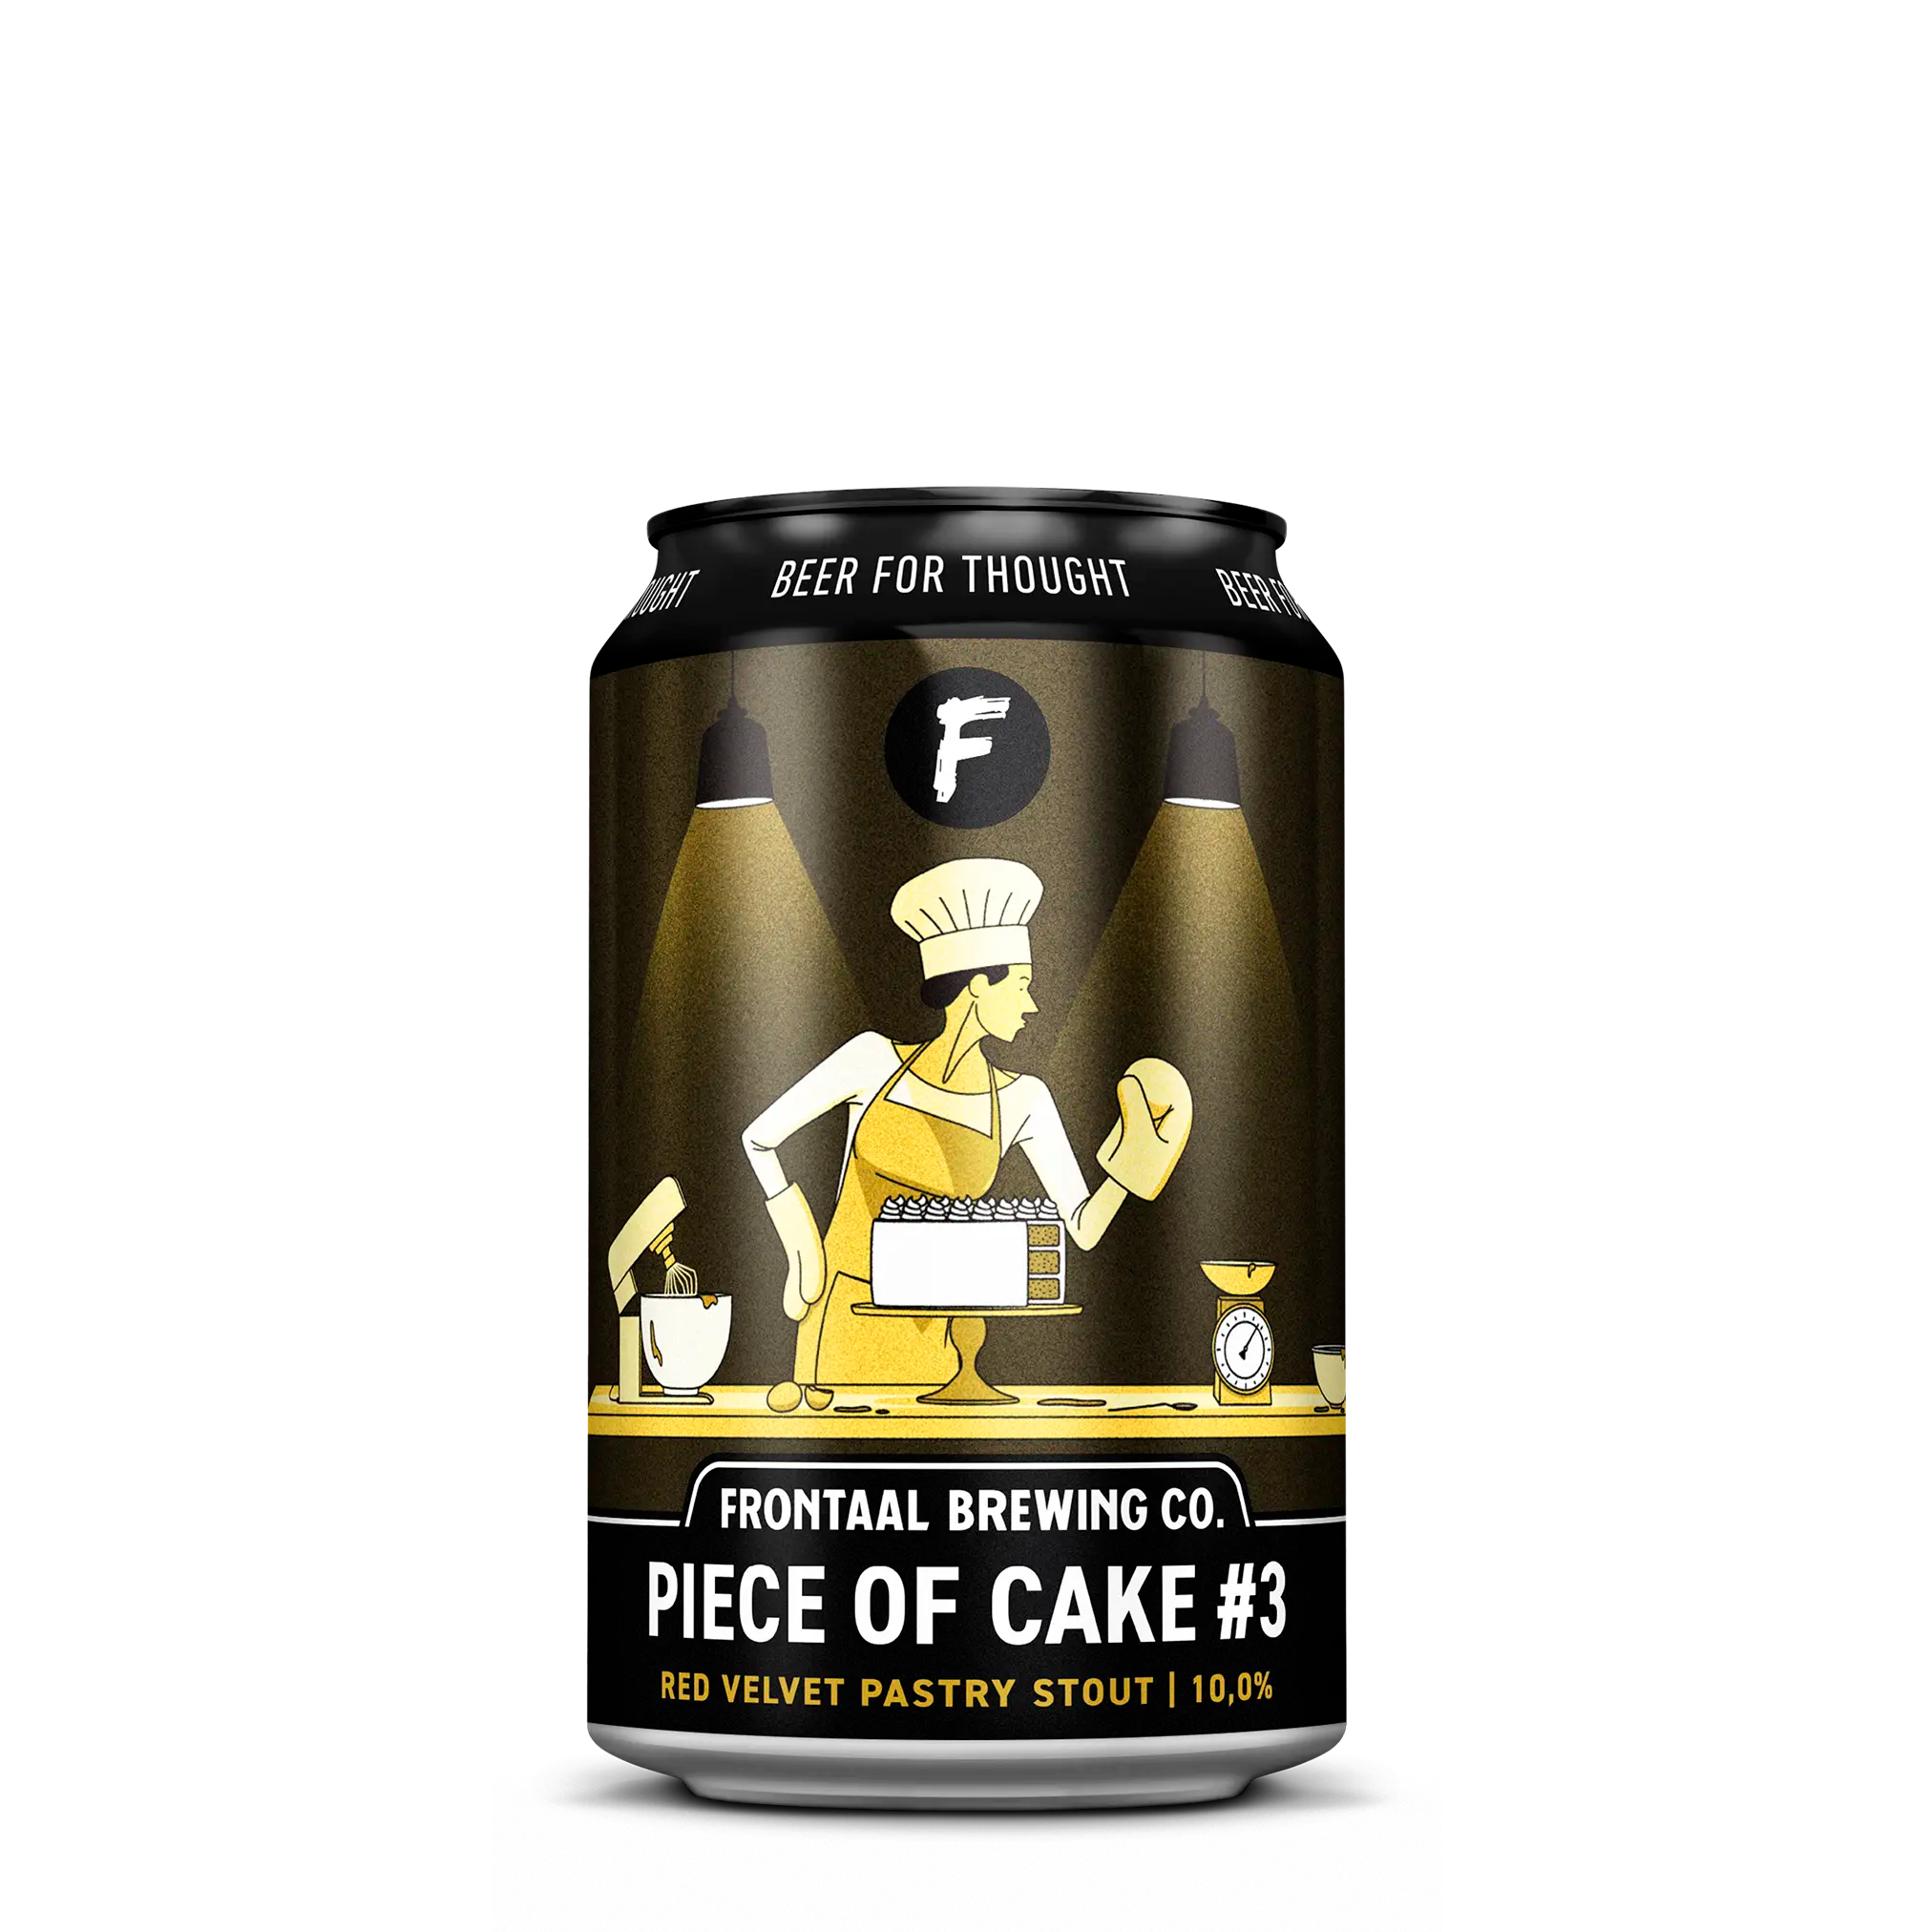 Piece of Cake #3 - Red Velvet Pastry Stout - Frontaal Brewing Co.